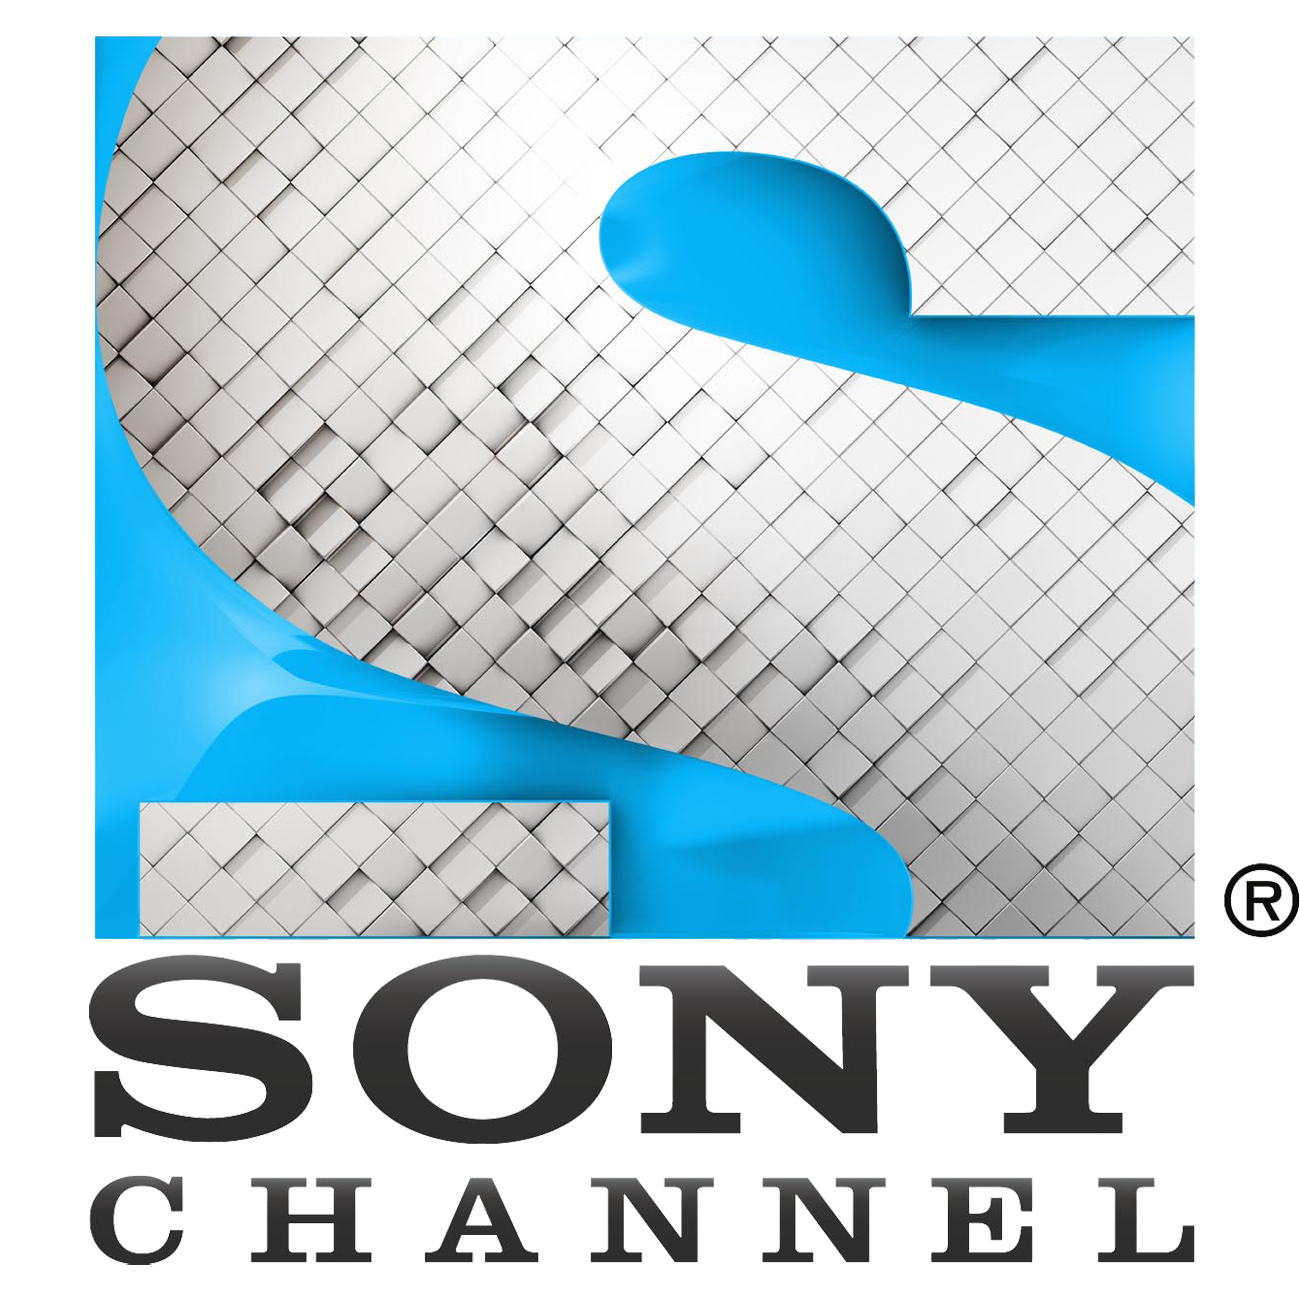 Naveen Kunal on LinkedIn: Sony Pictures Network channels get rebranded with new  logos and graphics